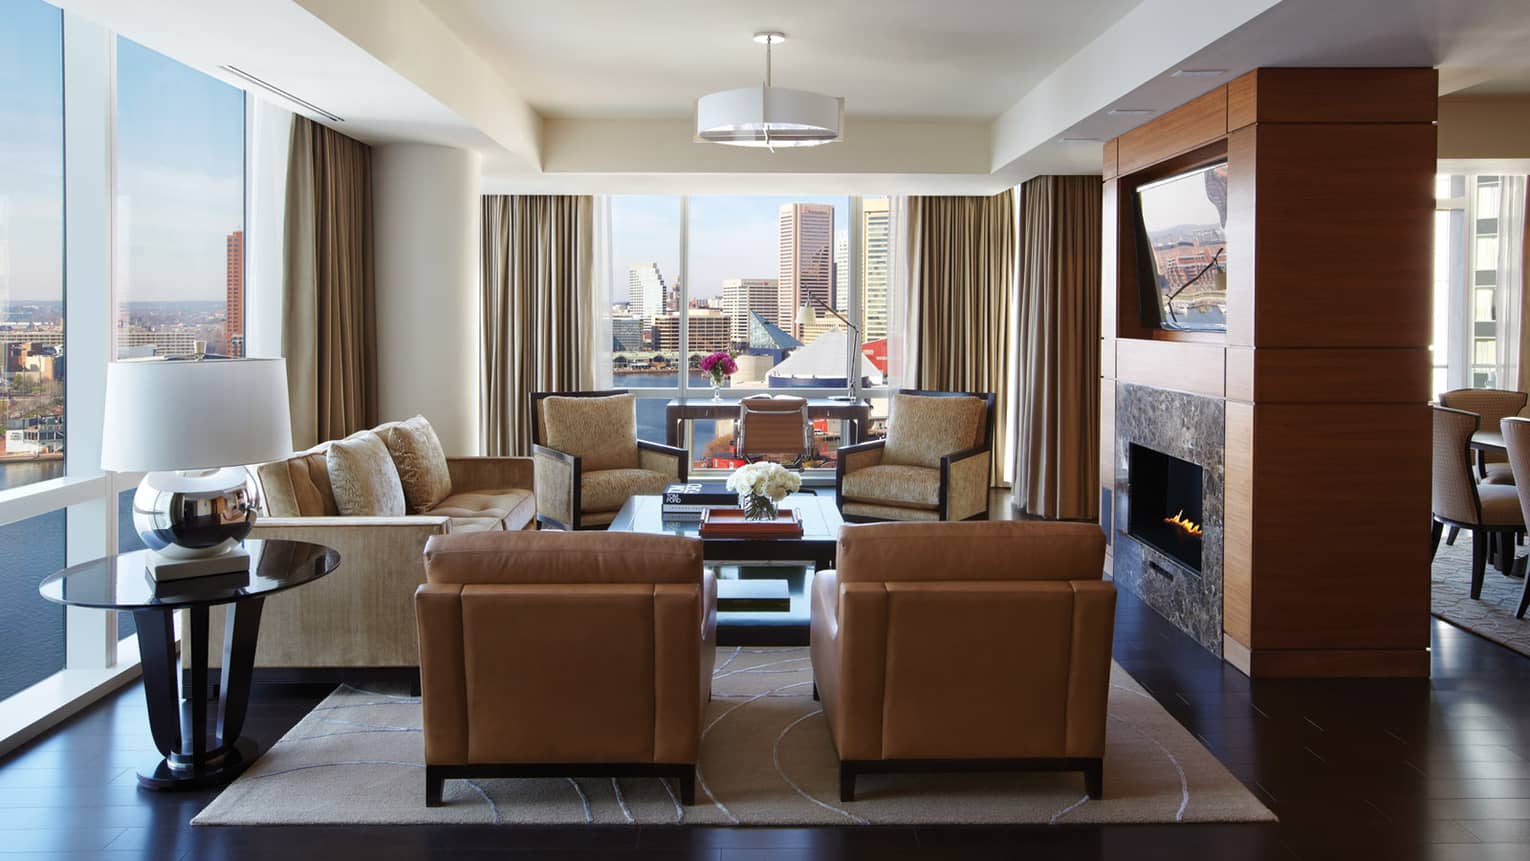 Serene Suite brown leather armchairs, sofa, chairs around gas fireplace, corner windows